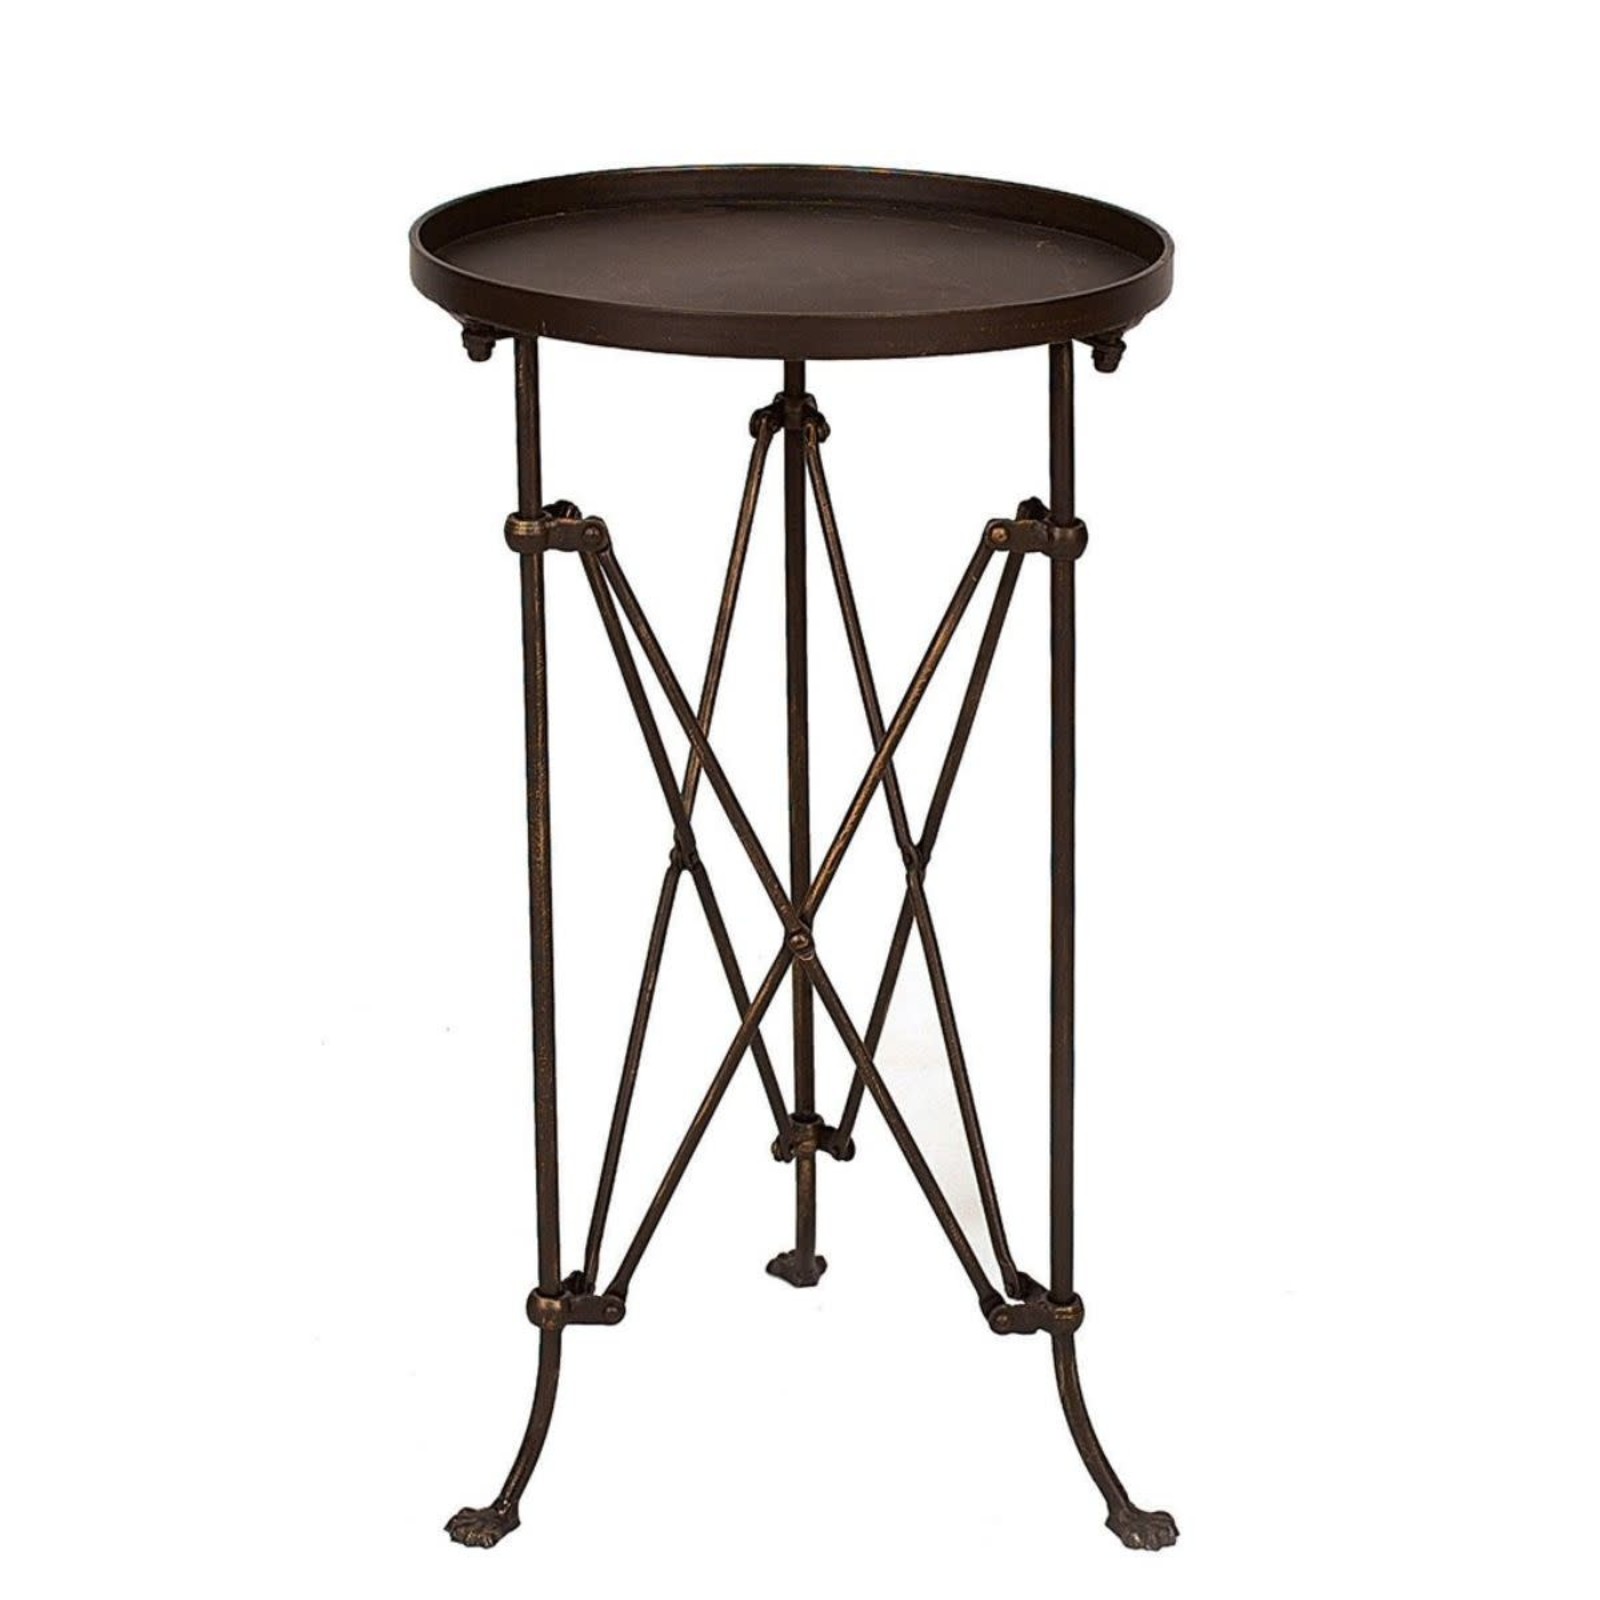 Creative Co-Op Round Metal Table Bronze Finish    HD6146 loading=